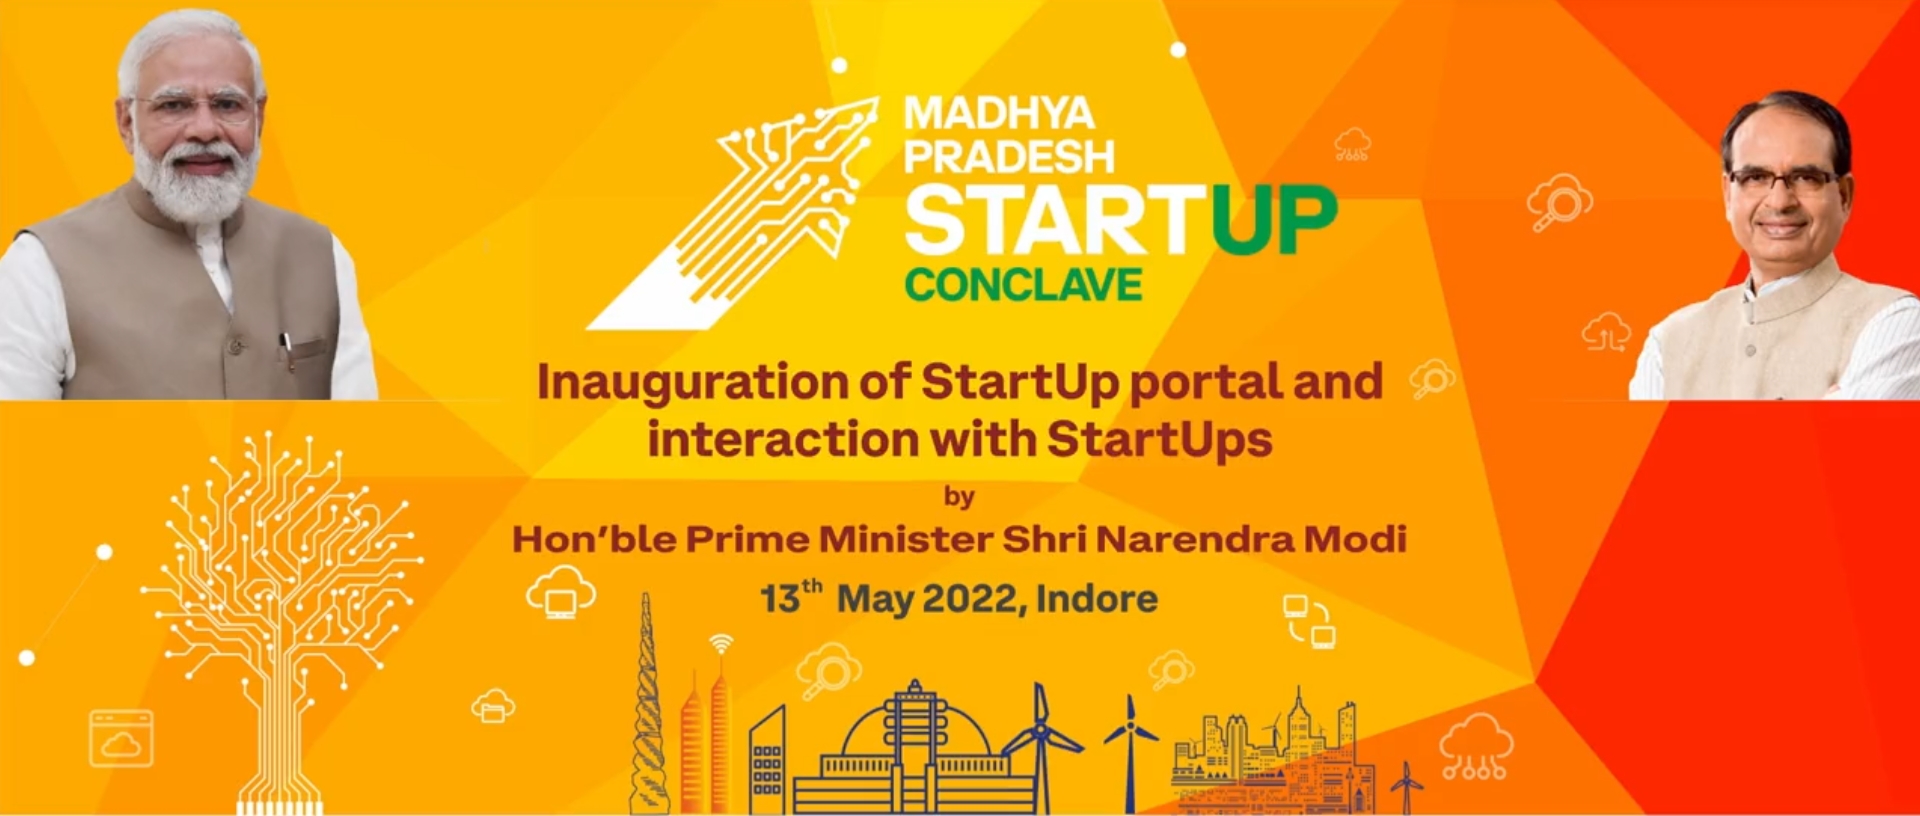 PM Modi will launch the MP startup policy 2022 today in Indore virtually